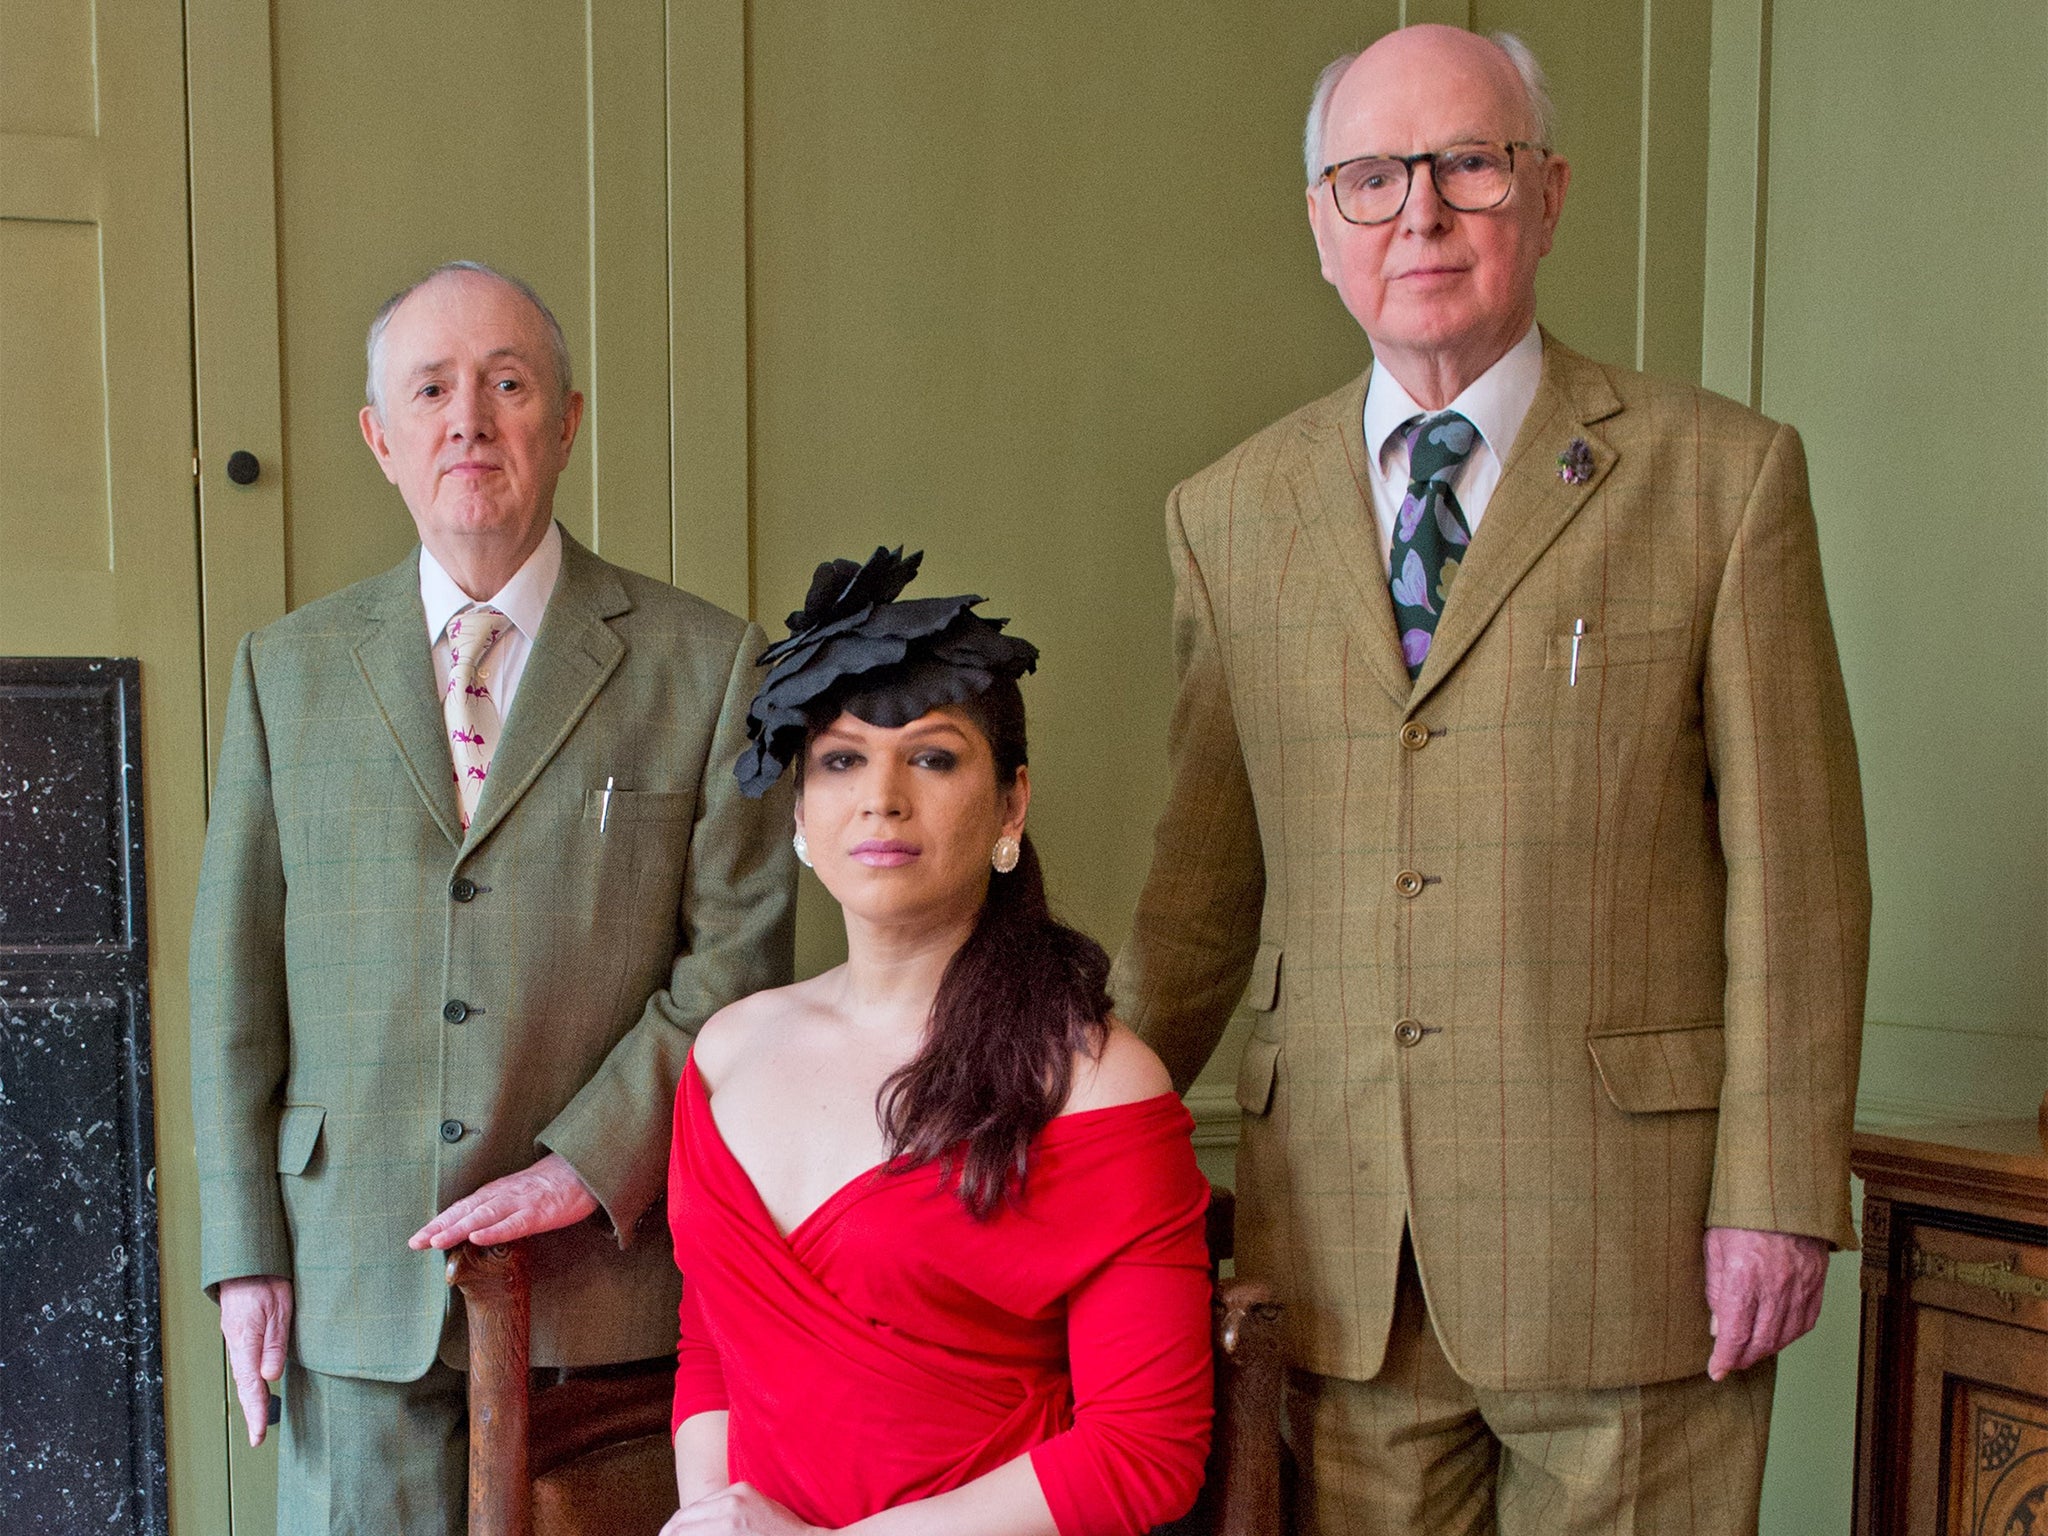 Gilbert & George and Victoria appear together at their studios in London ahead of Serpentine's 10th annual festival of ideas